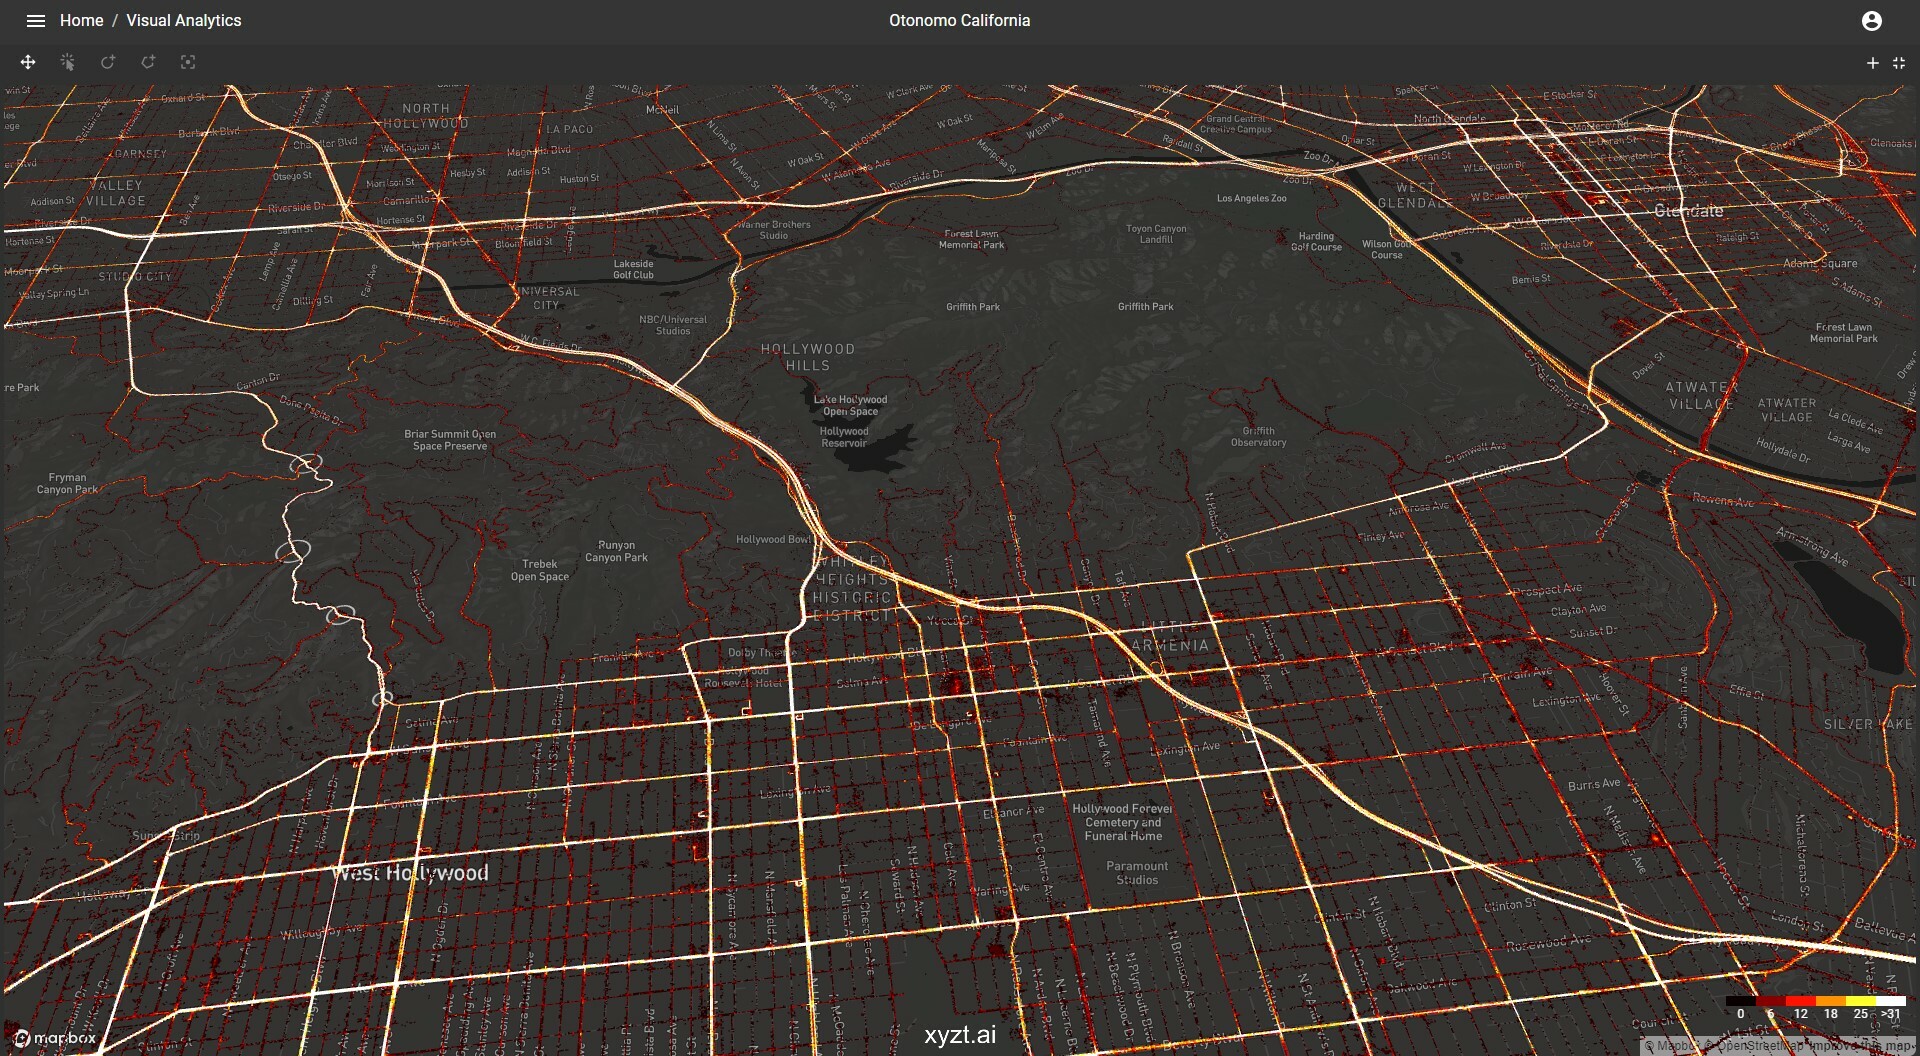 Traffic data in Los Angeles visualized on a heatmap.